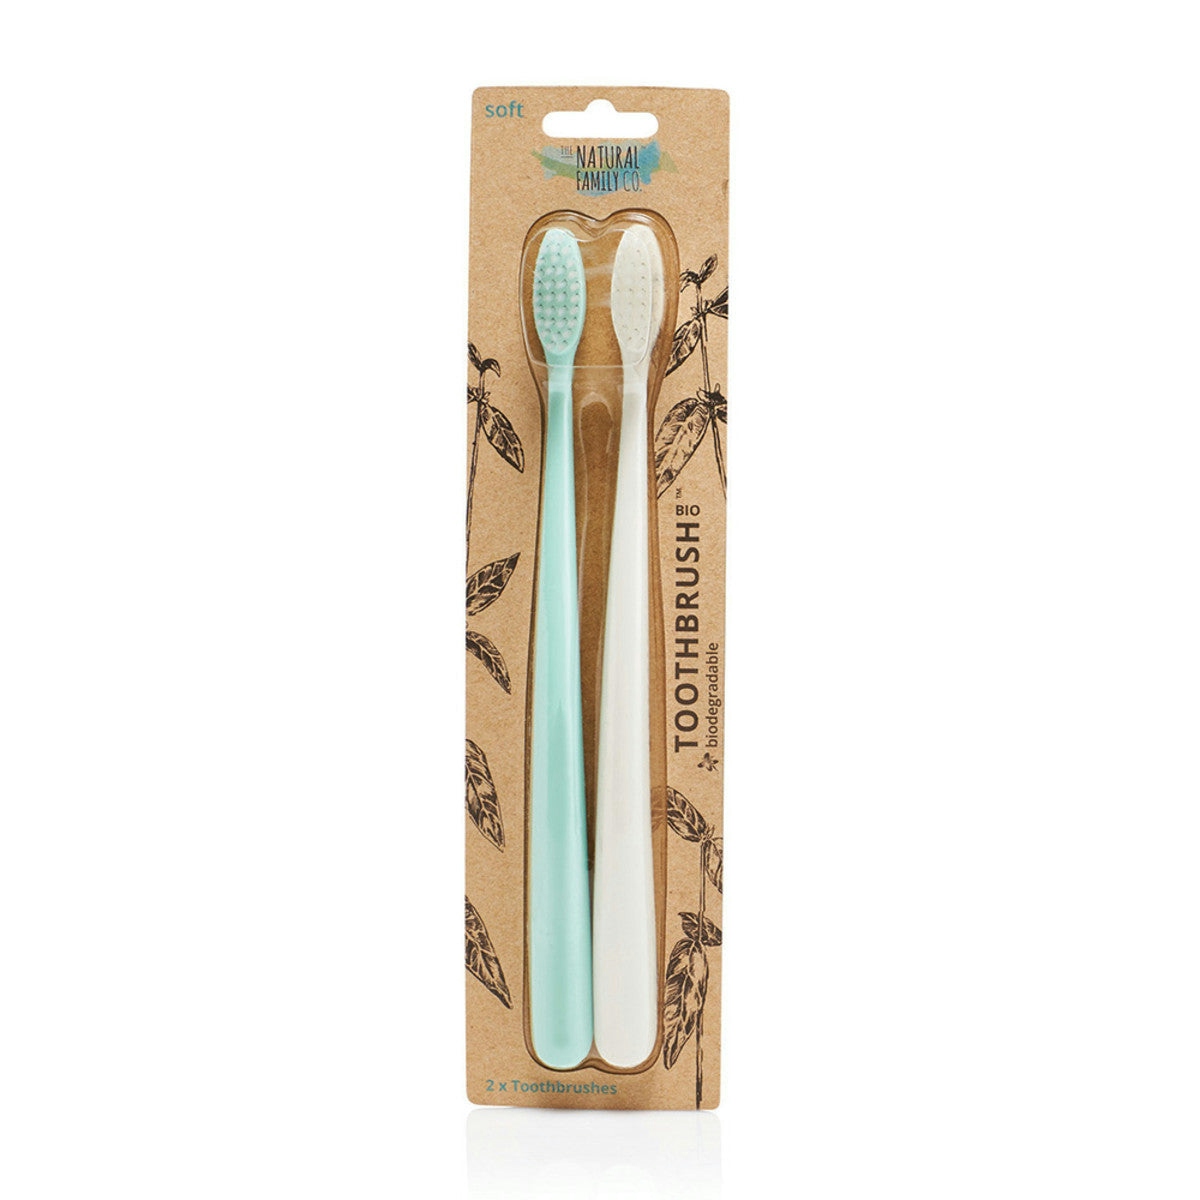 image of The Natural Family Co. Bio Toothbrush Ivory Desert & River Mint Twin Pack on white background